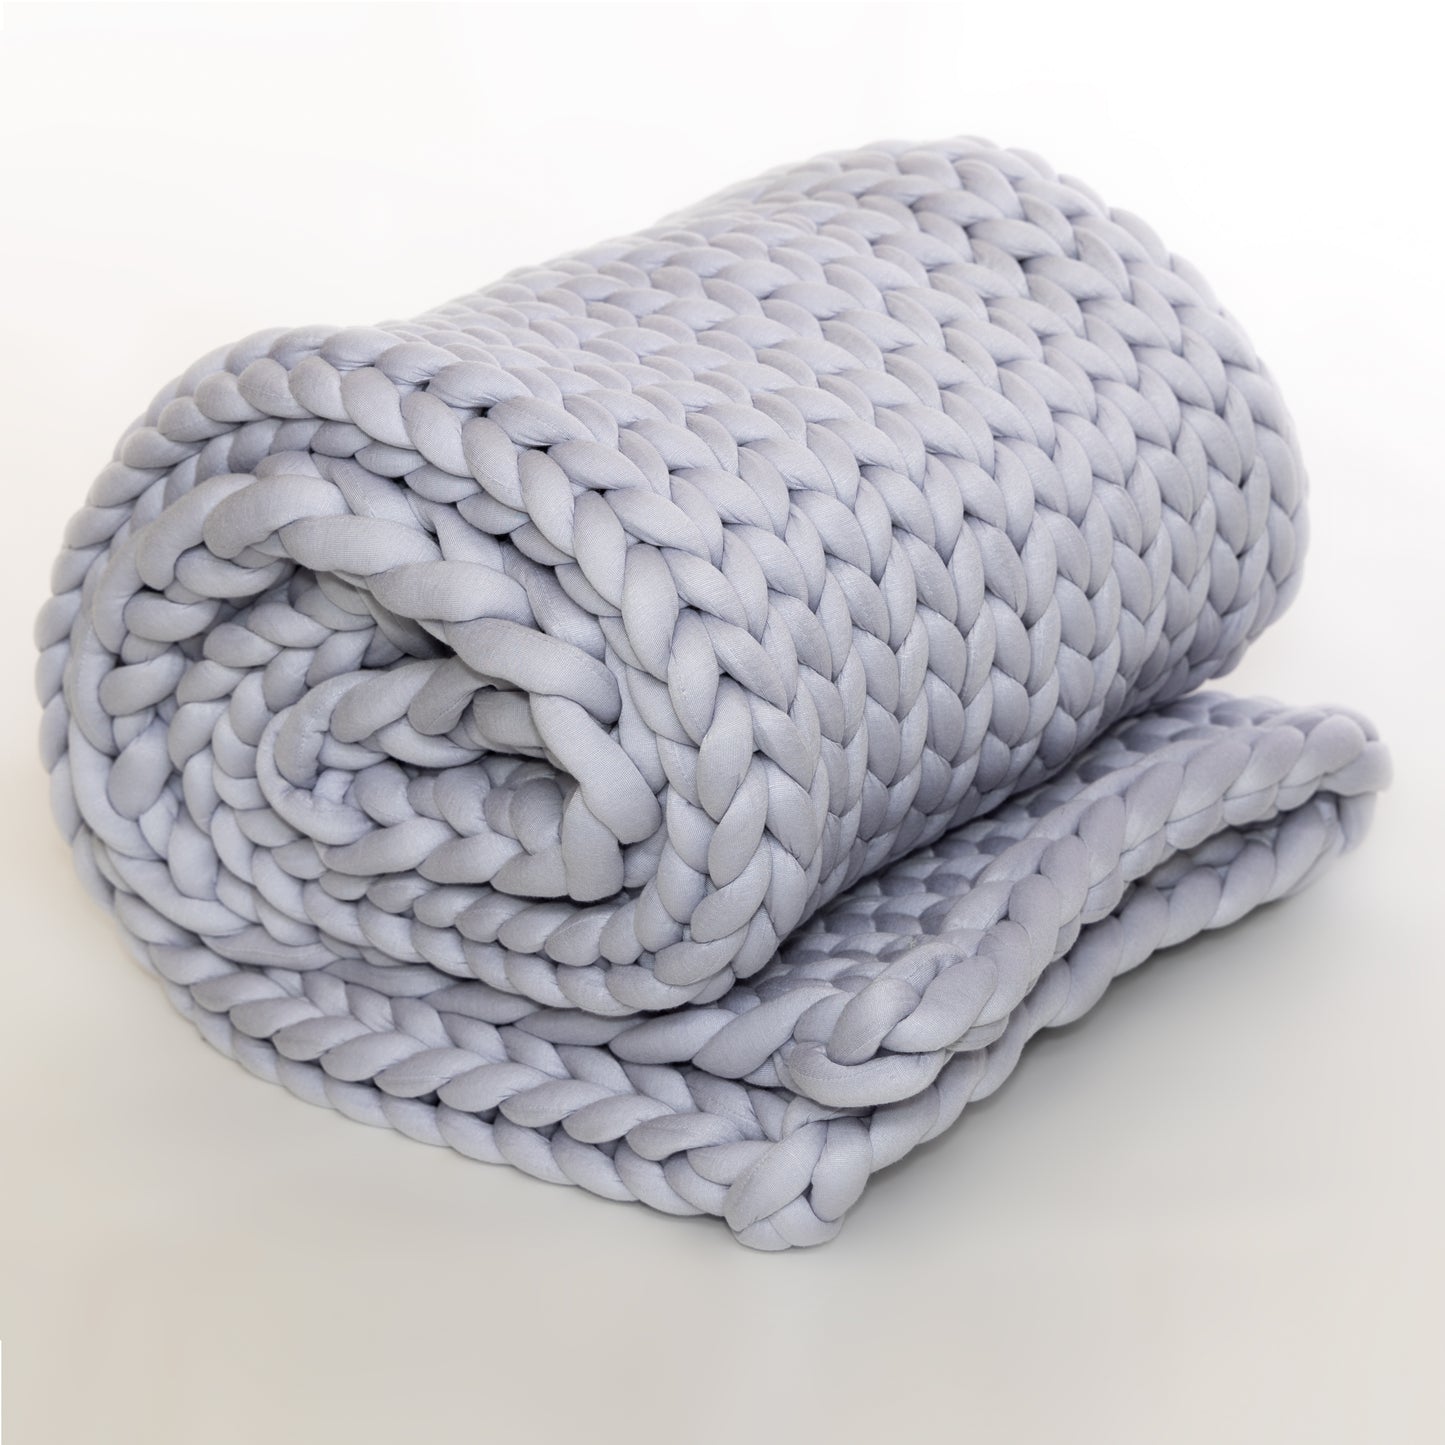 Chunky Knit Weighted Blanket, Queen Size, Silver Gray, 18 Pounds